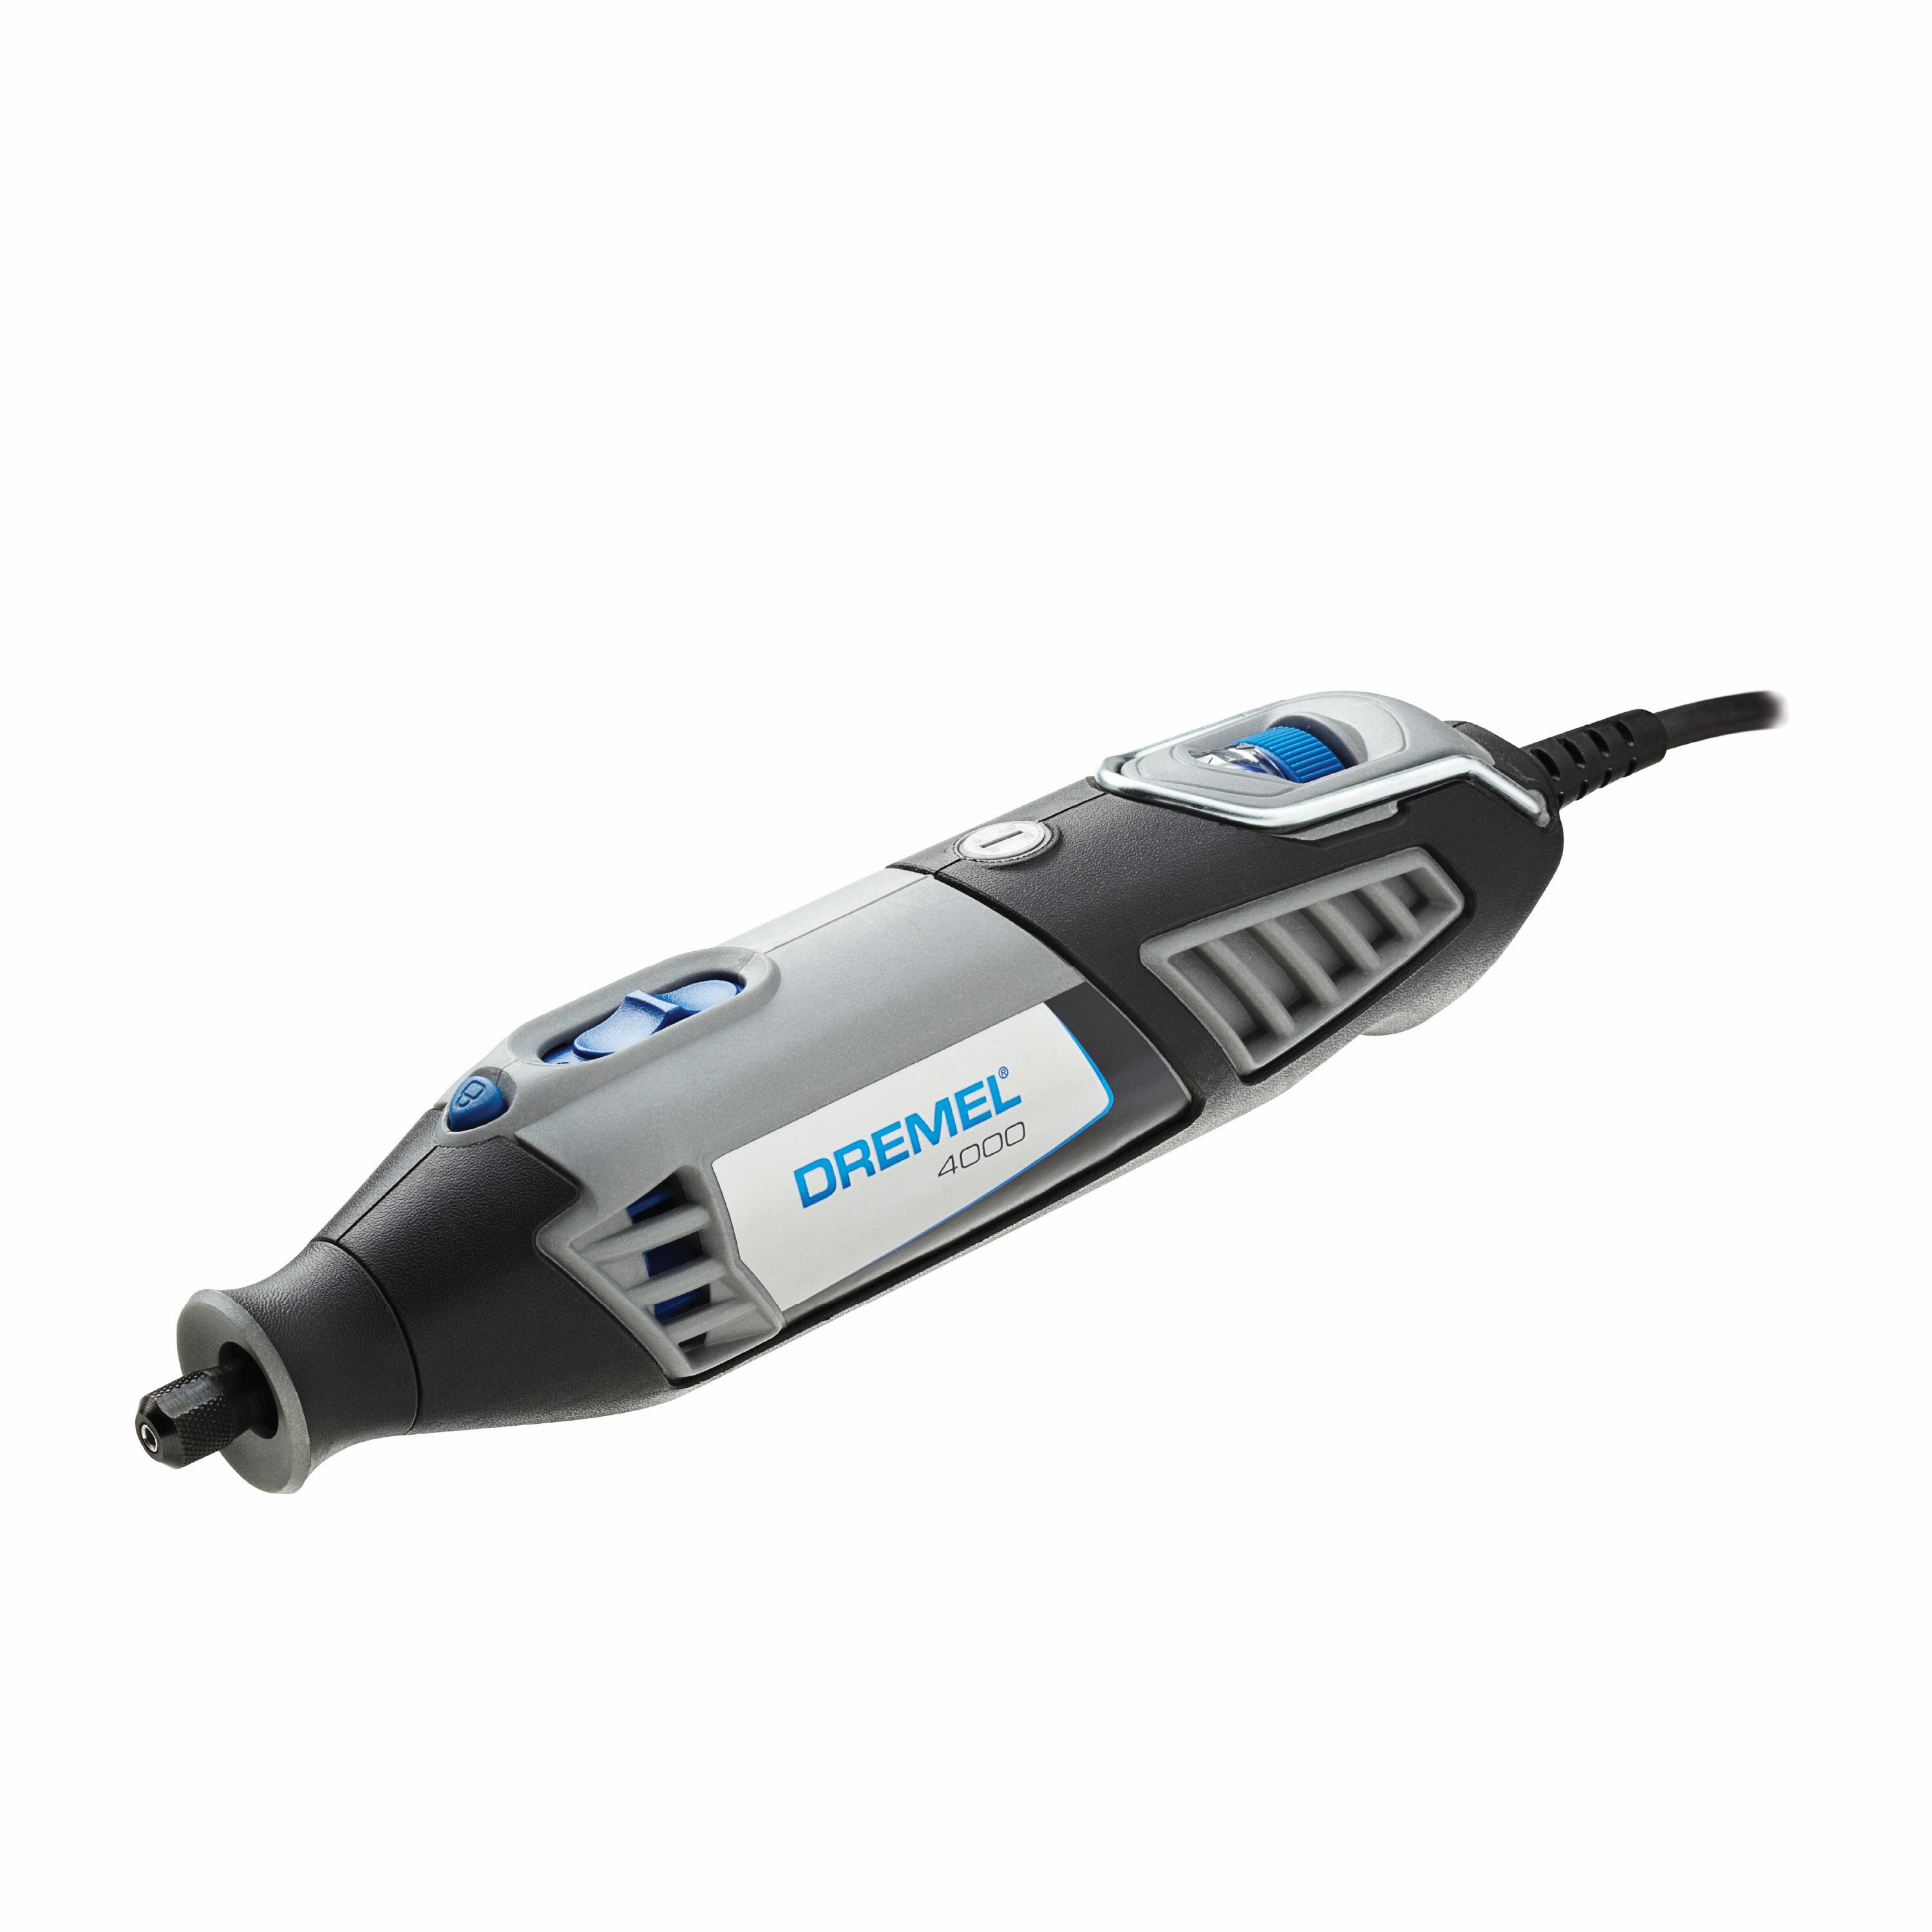 Dremel 4000 Variable Speed Corded 1.6-Amp Multipurpose Rotary Tool Kit in the Rotary department at Lowes.com